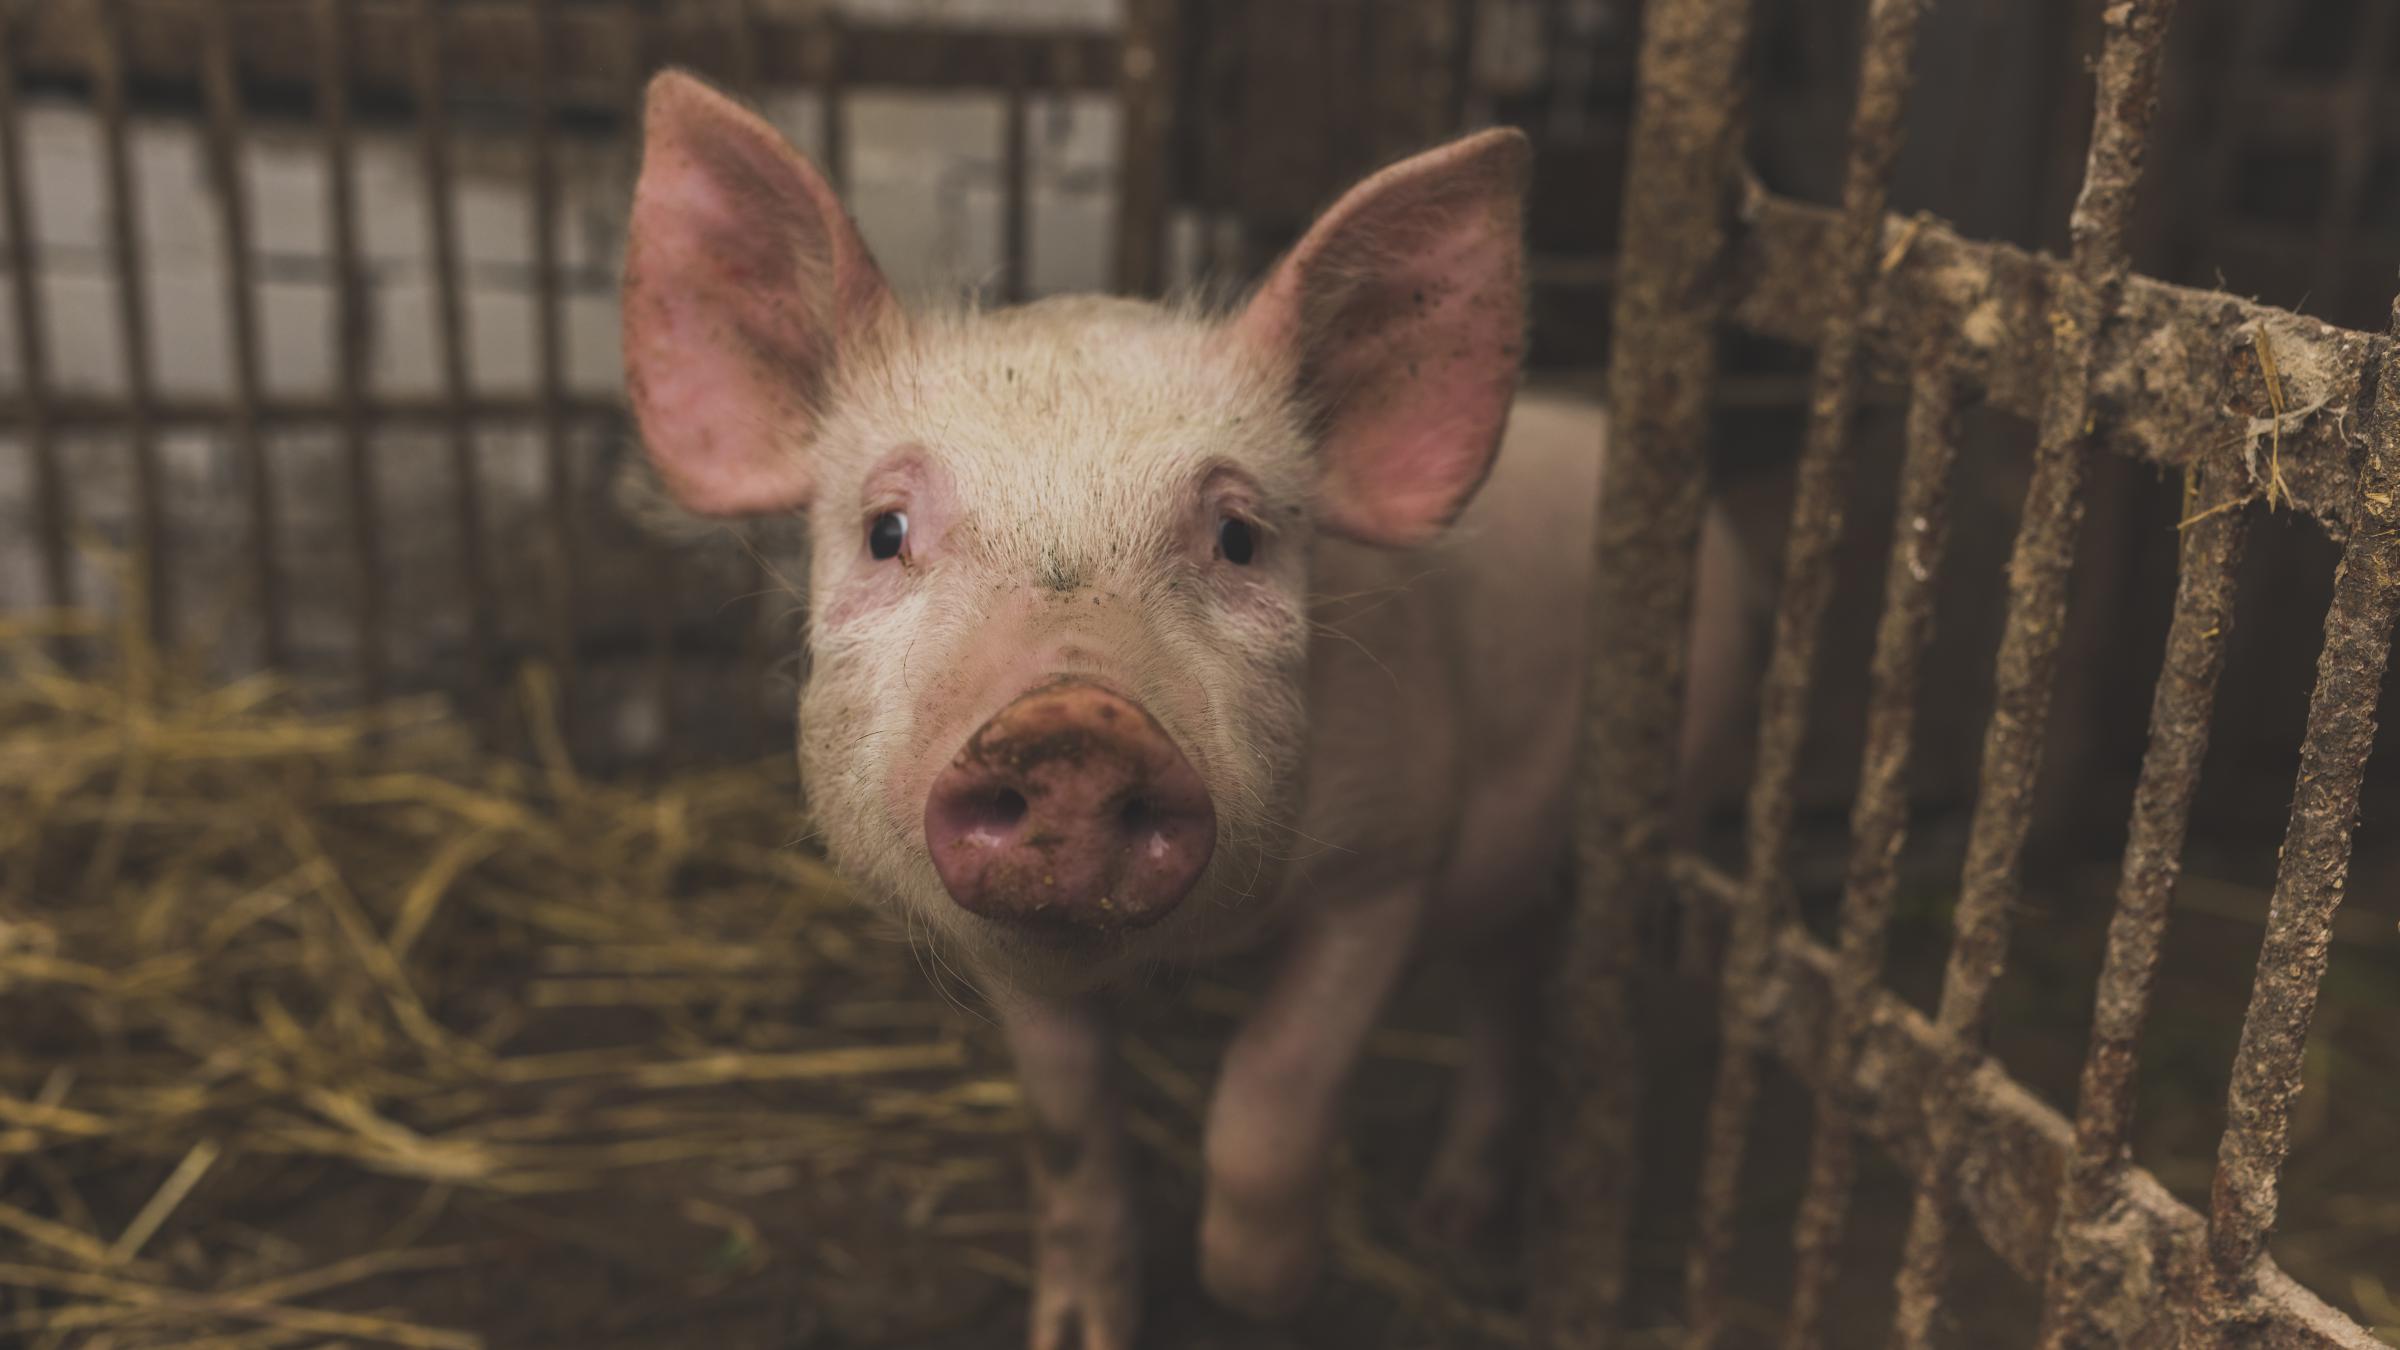 What is pig analysis?